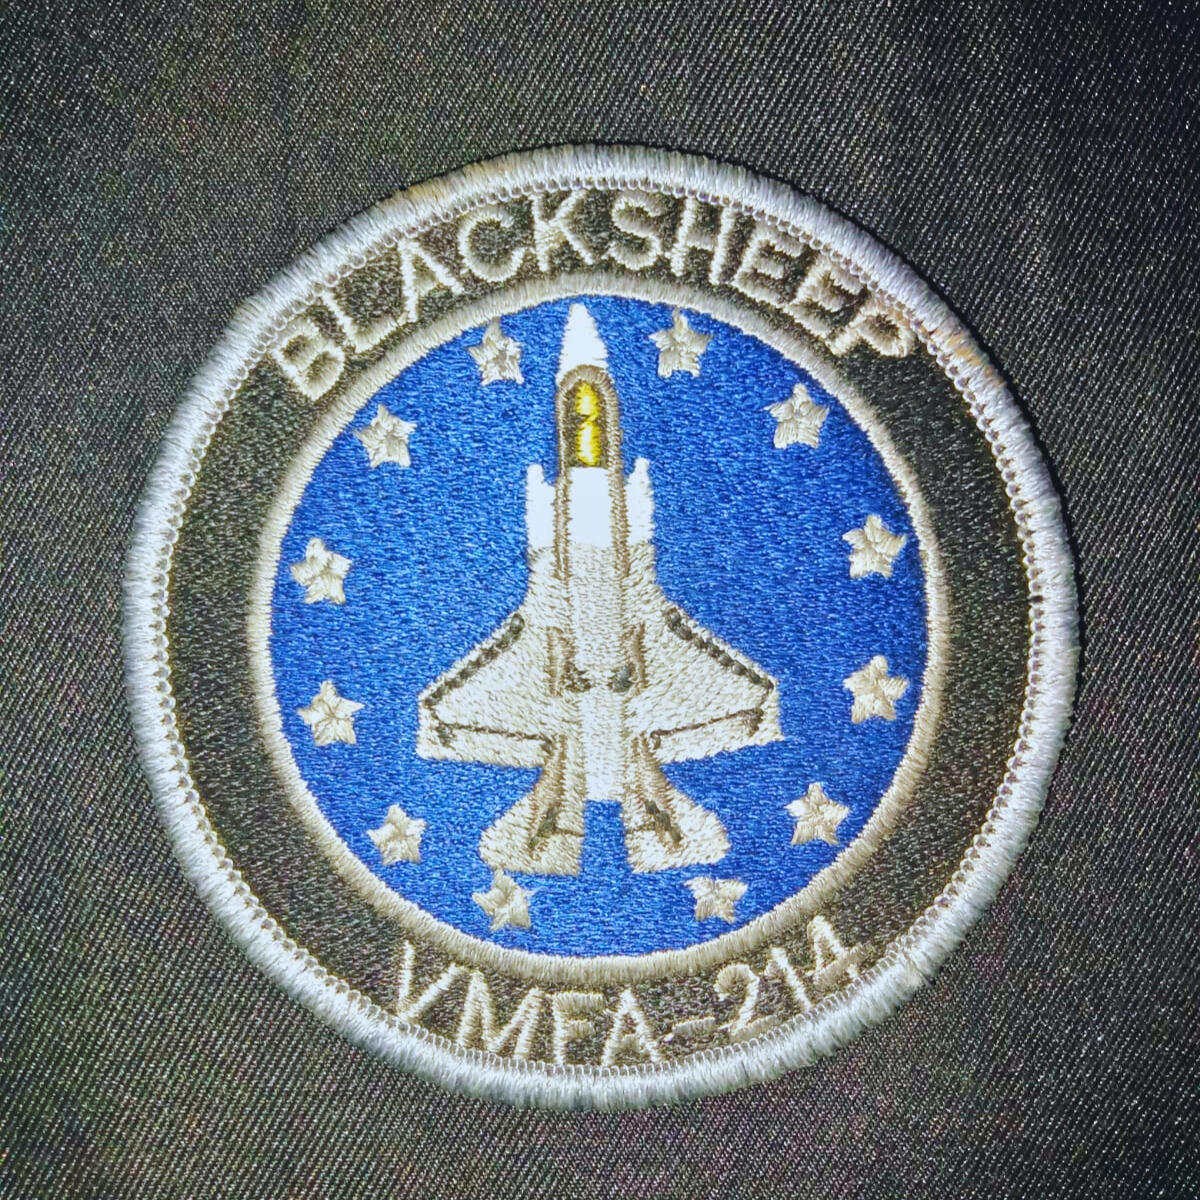 Embroidered Black Sheep Patch. Give us a call for all your apparel needs ☎️ +1 323 902 5939 📧 email us at info@popularpunch.com #popularpunch #embroidery #embroiderypatch #customembroidery #customembroiderypatch #blacksheep #blacksheeppatch #vmfa214